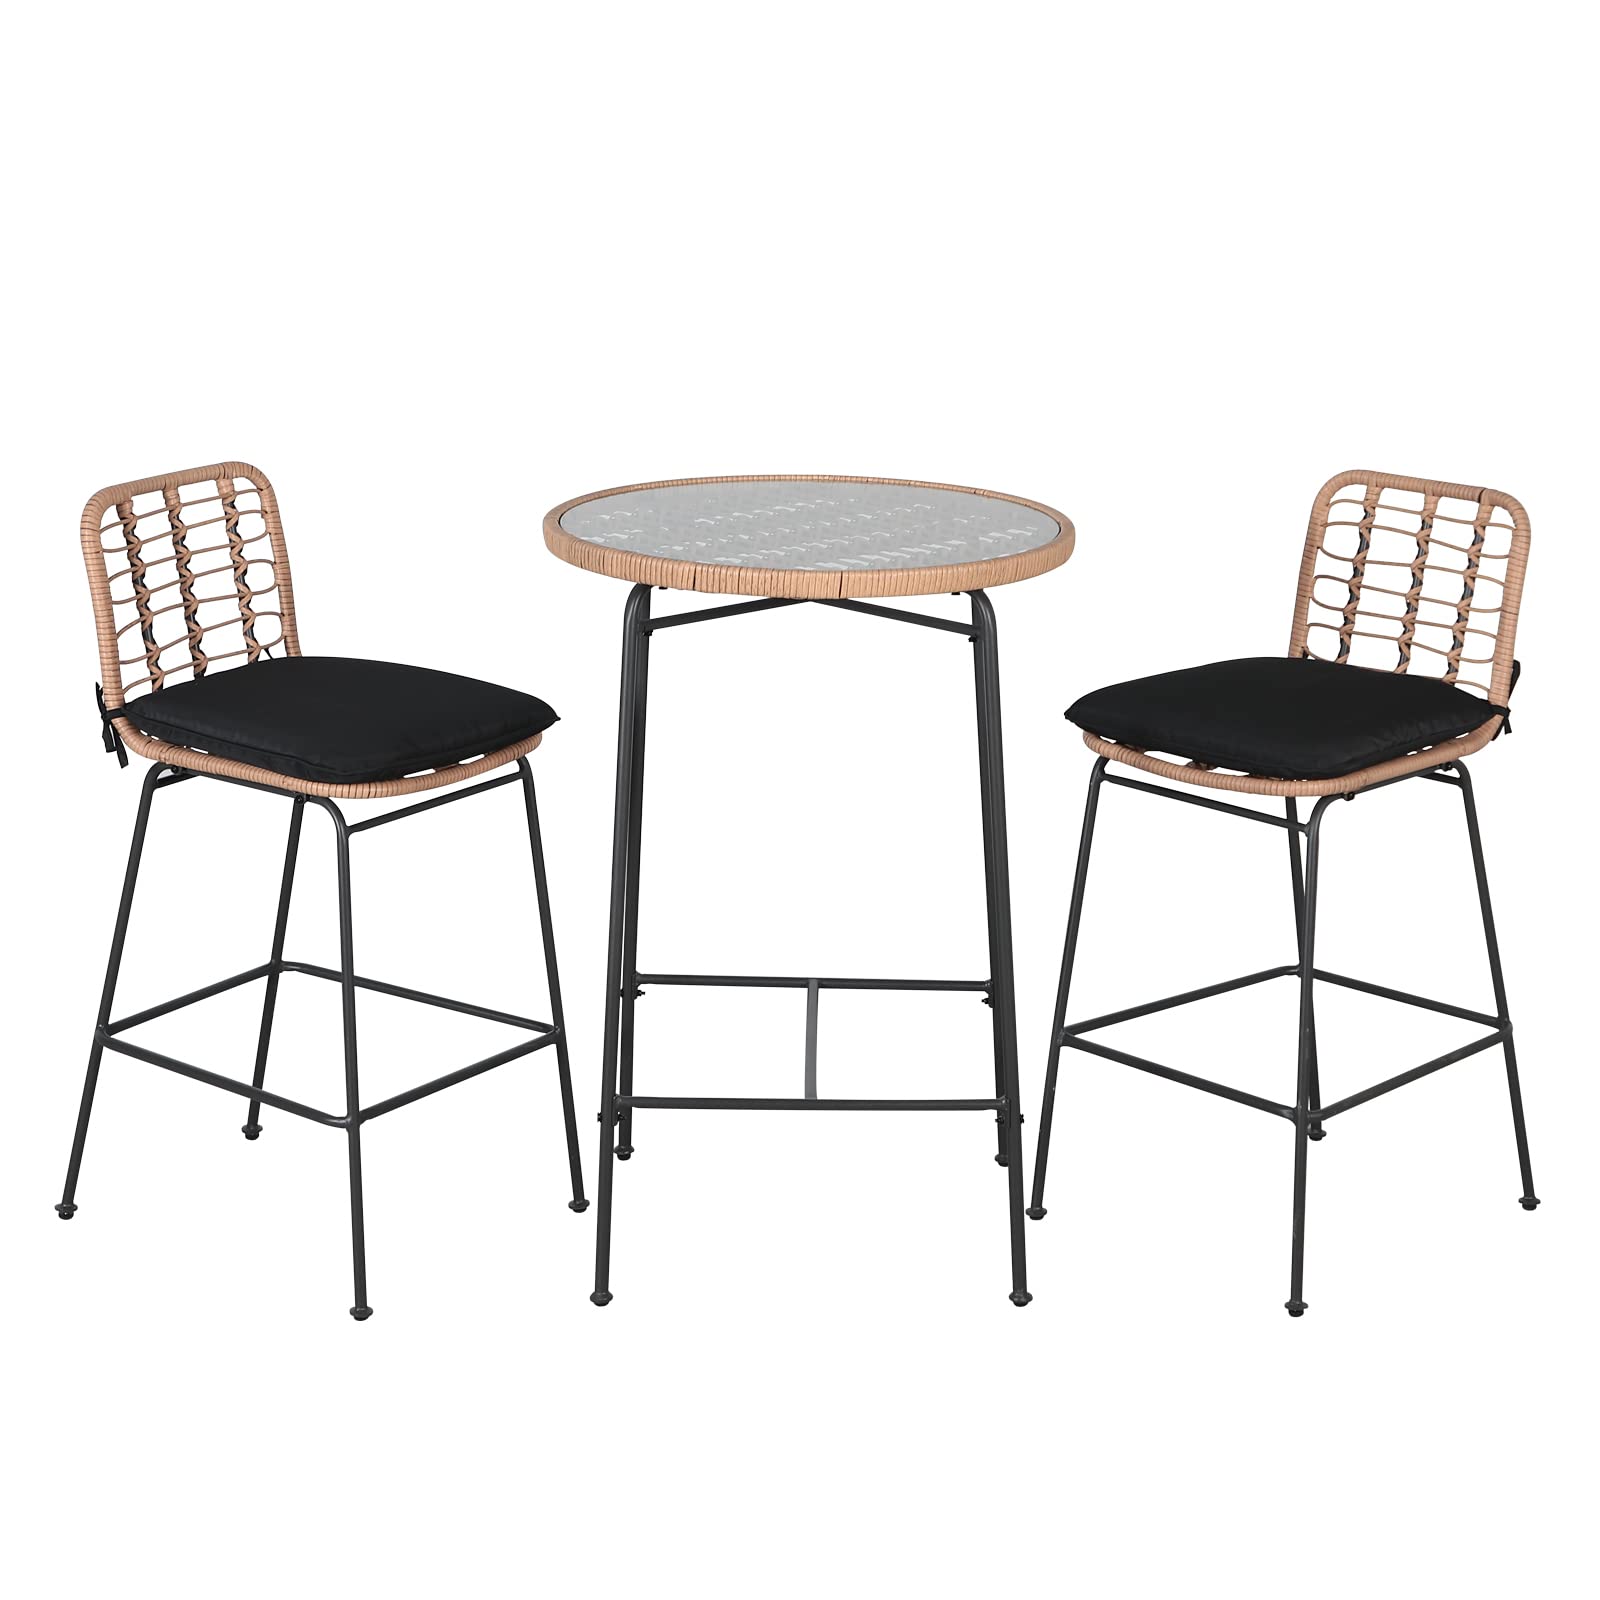 Muses 3-pc. Wicker Bistro Set, 2 Height Rattan Bar Stools with Round Glass Coffee Table, beige wicker, dark grey cushion